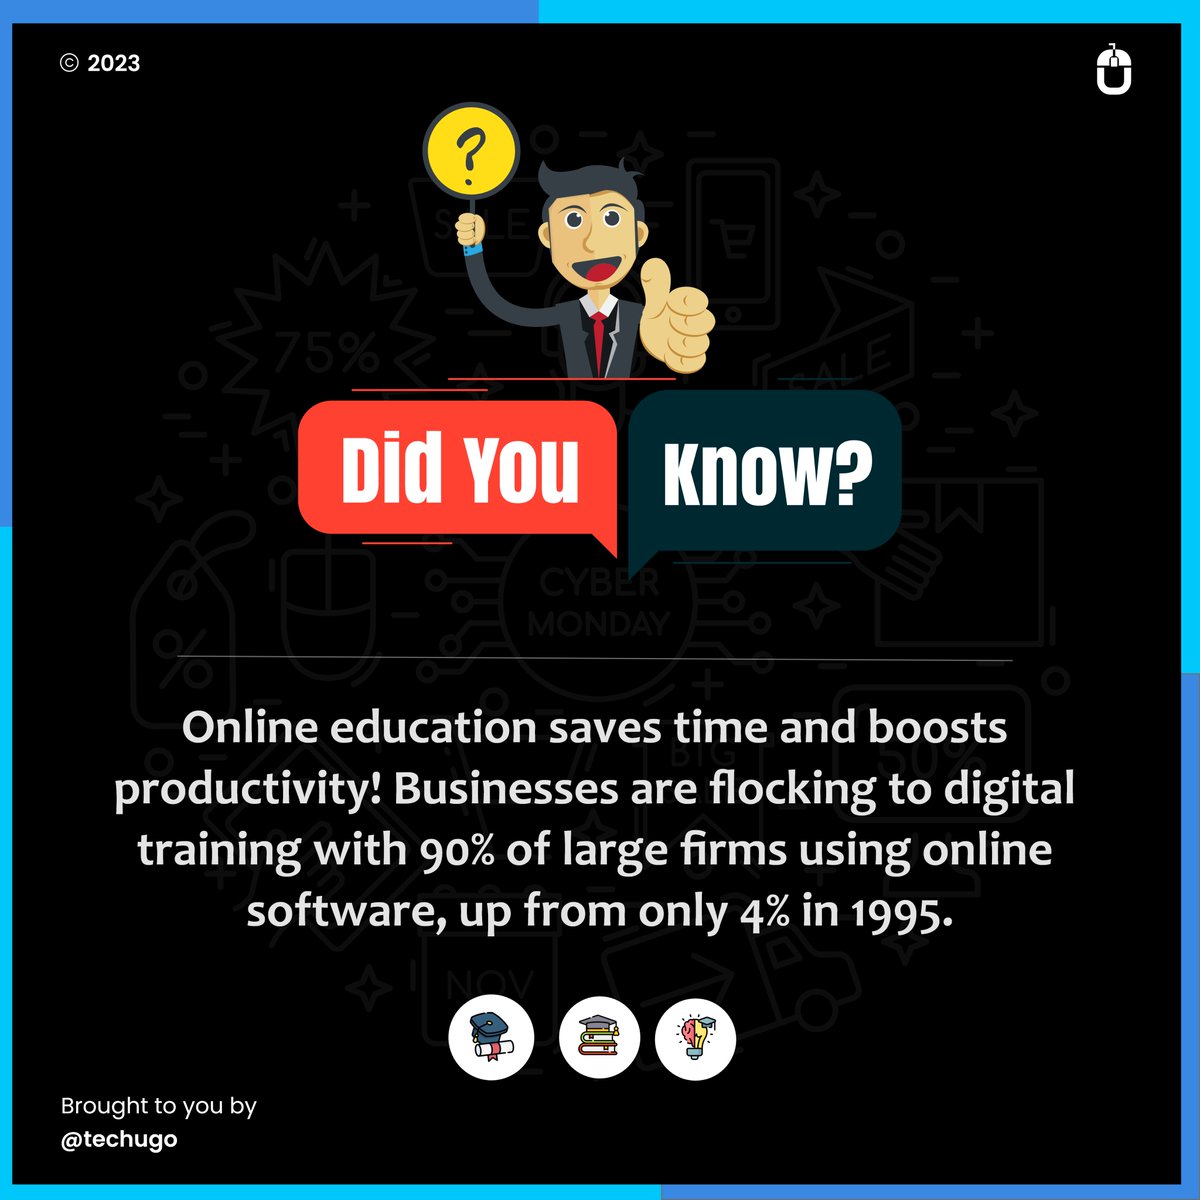 Unlock the power of online education! 💡 Did you know it saves time and boosts productivity? 

#OnlineEducation #ProductivityBoost #DigitalTraining #Elearning #EdTech #FutureOfWork #LearningAndDevelopment #CorporateTraining #techugo